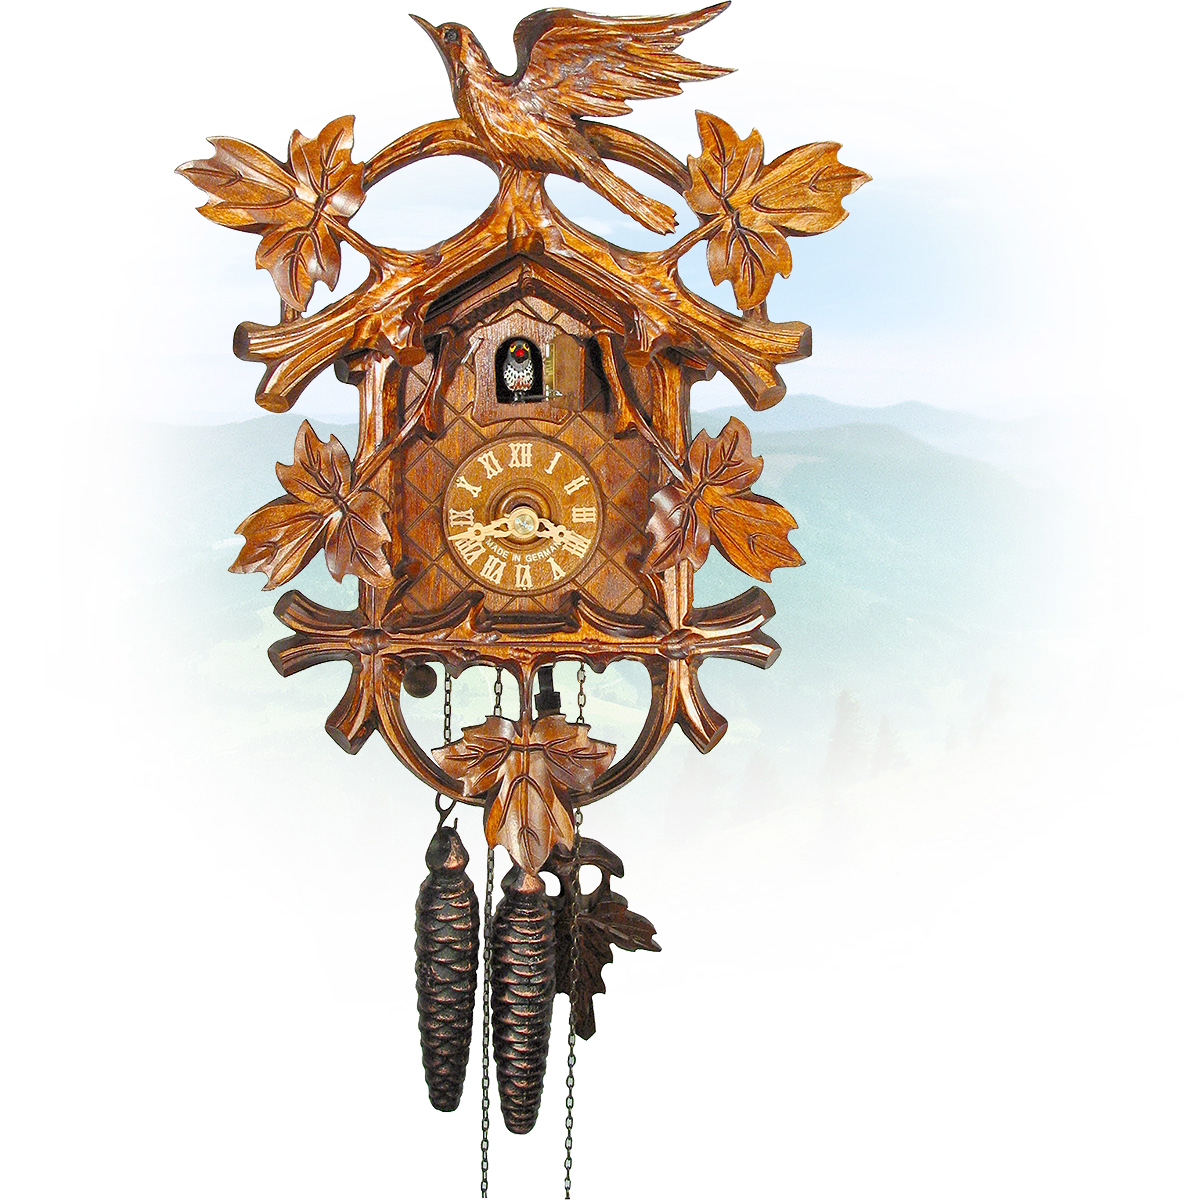 Cuckoo Clock Dial Wood 6 cm or 2 3/8" Made in Germany 